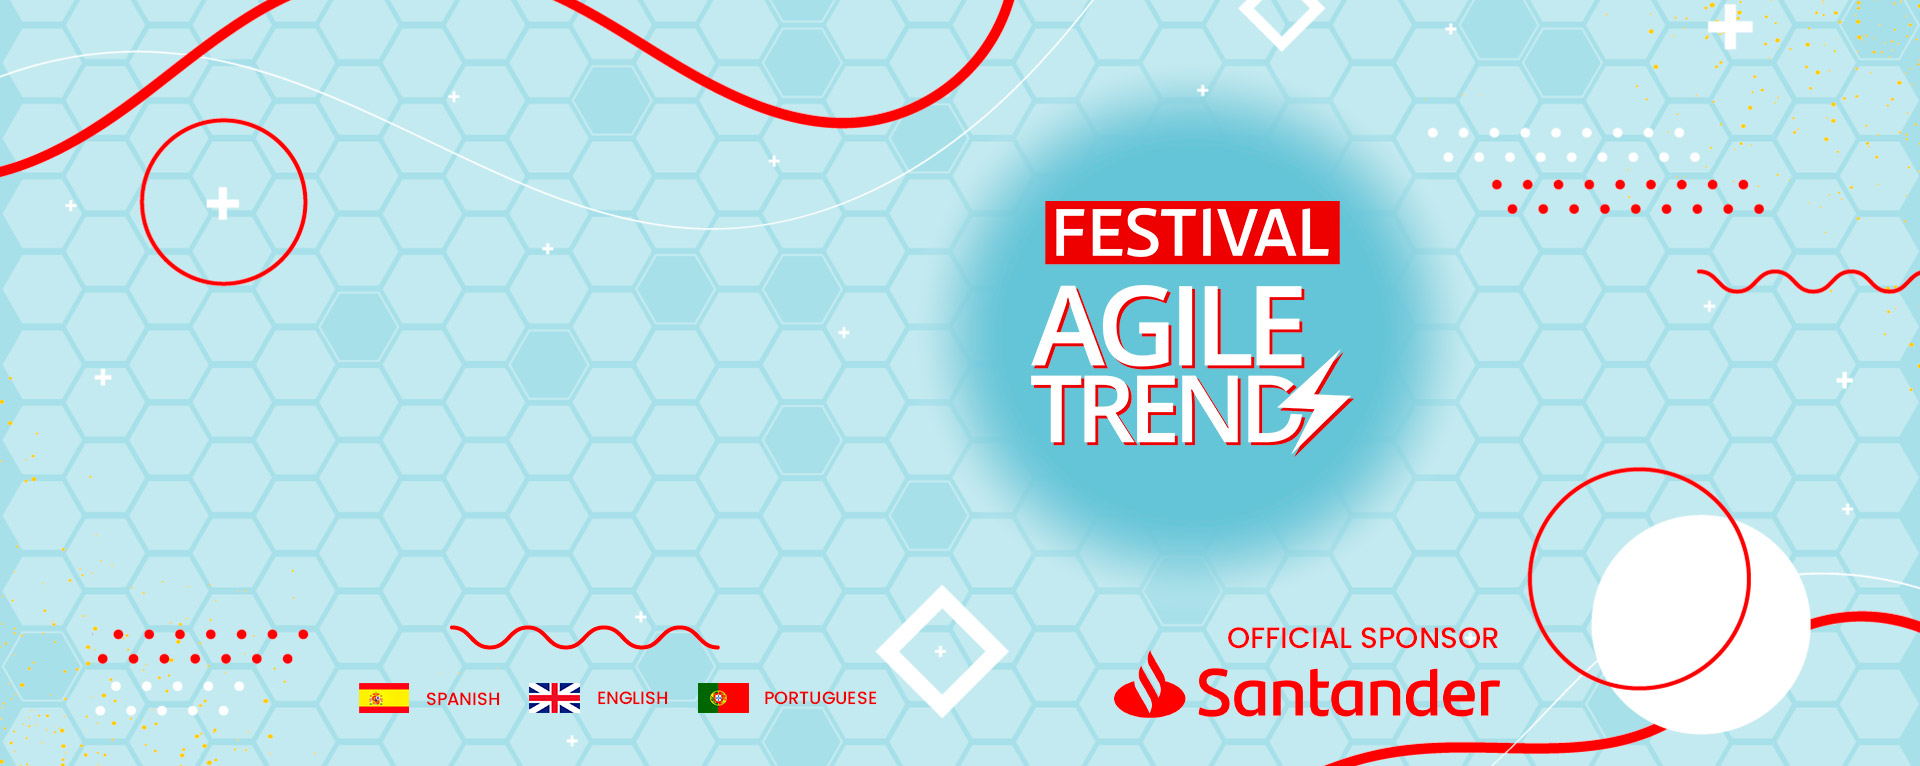 Festival Agile Trends - campes.org